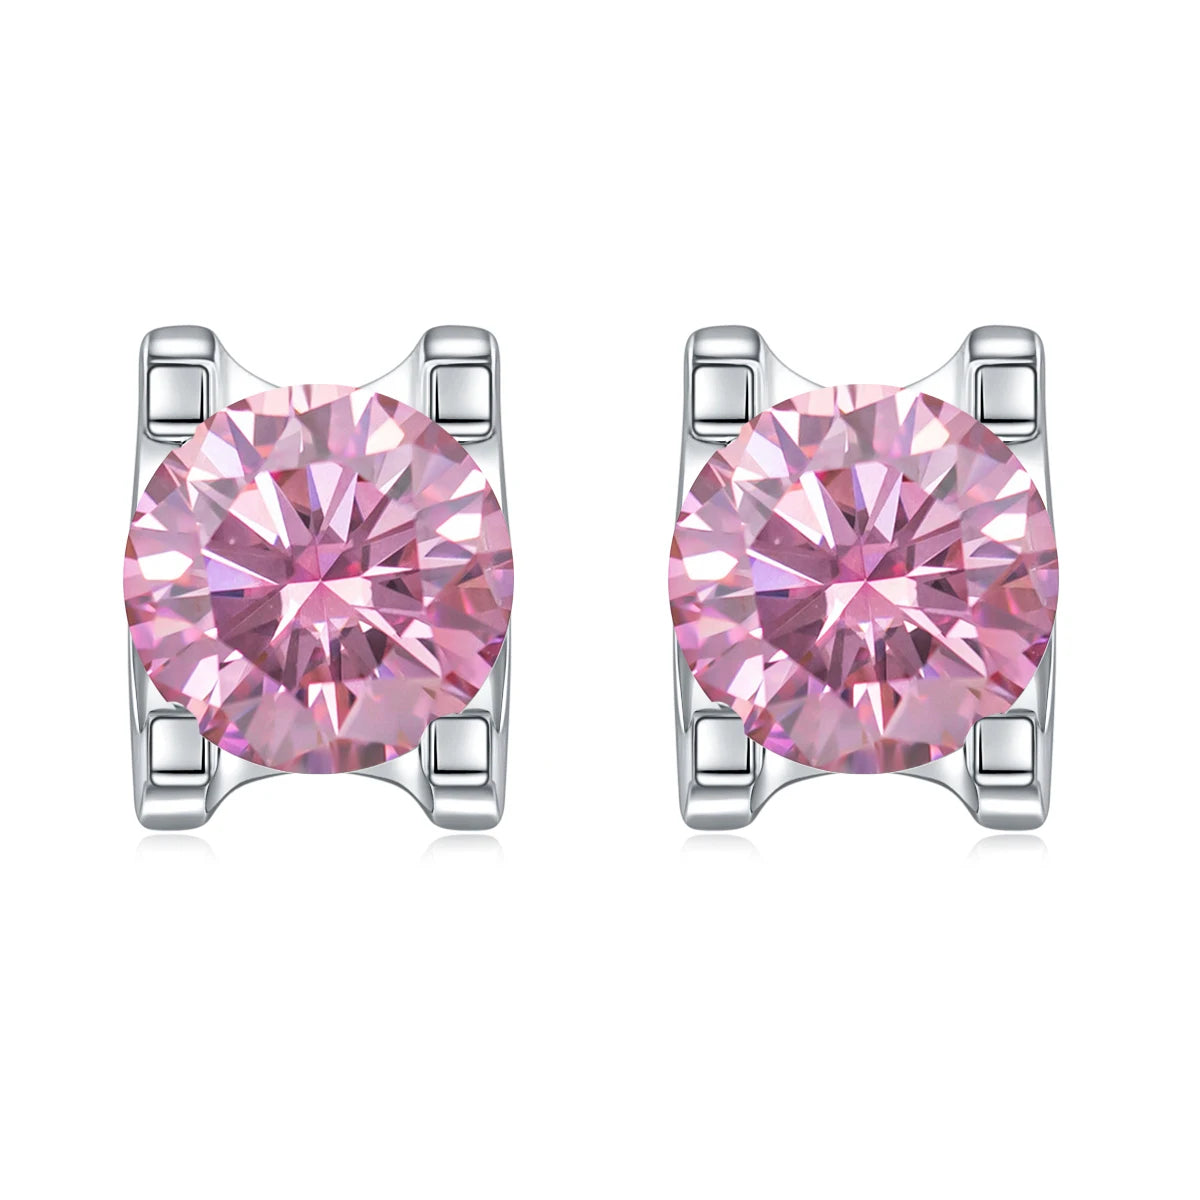 GEM'S BALLET Moissanite Earrings 0.5ct 5mm Round Moissanite Twisted Prong Stud Earrings in 925 Sterling Silver Gift For Her Pink 925 Sterling Silver CHINA